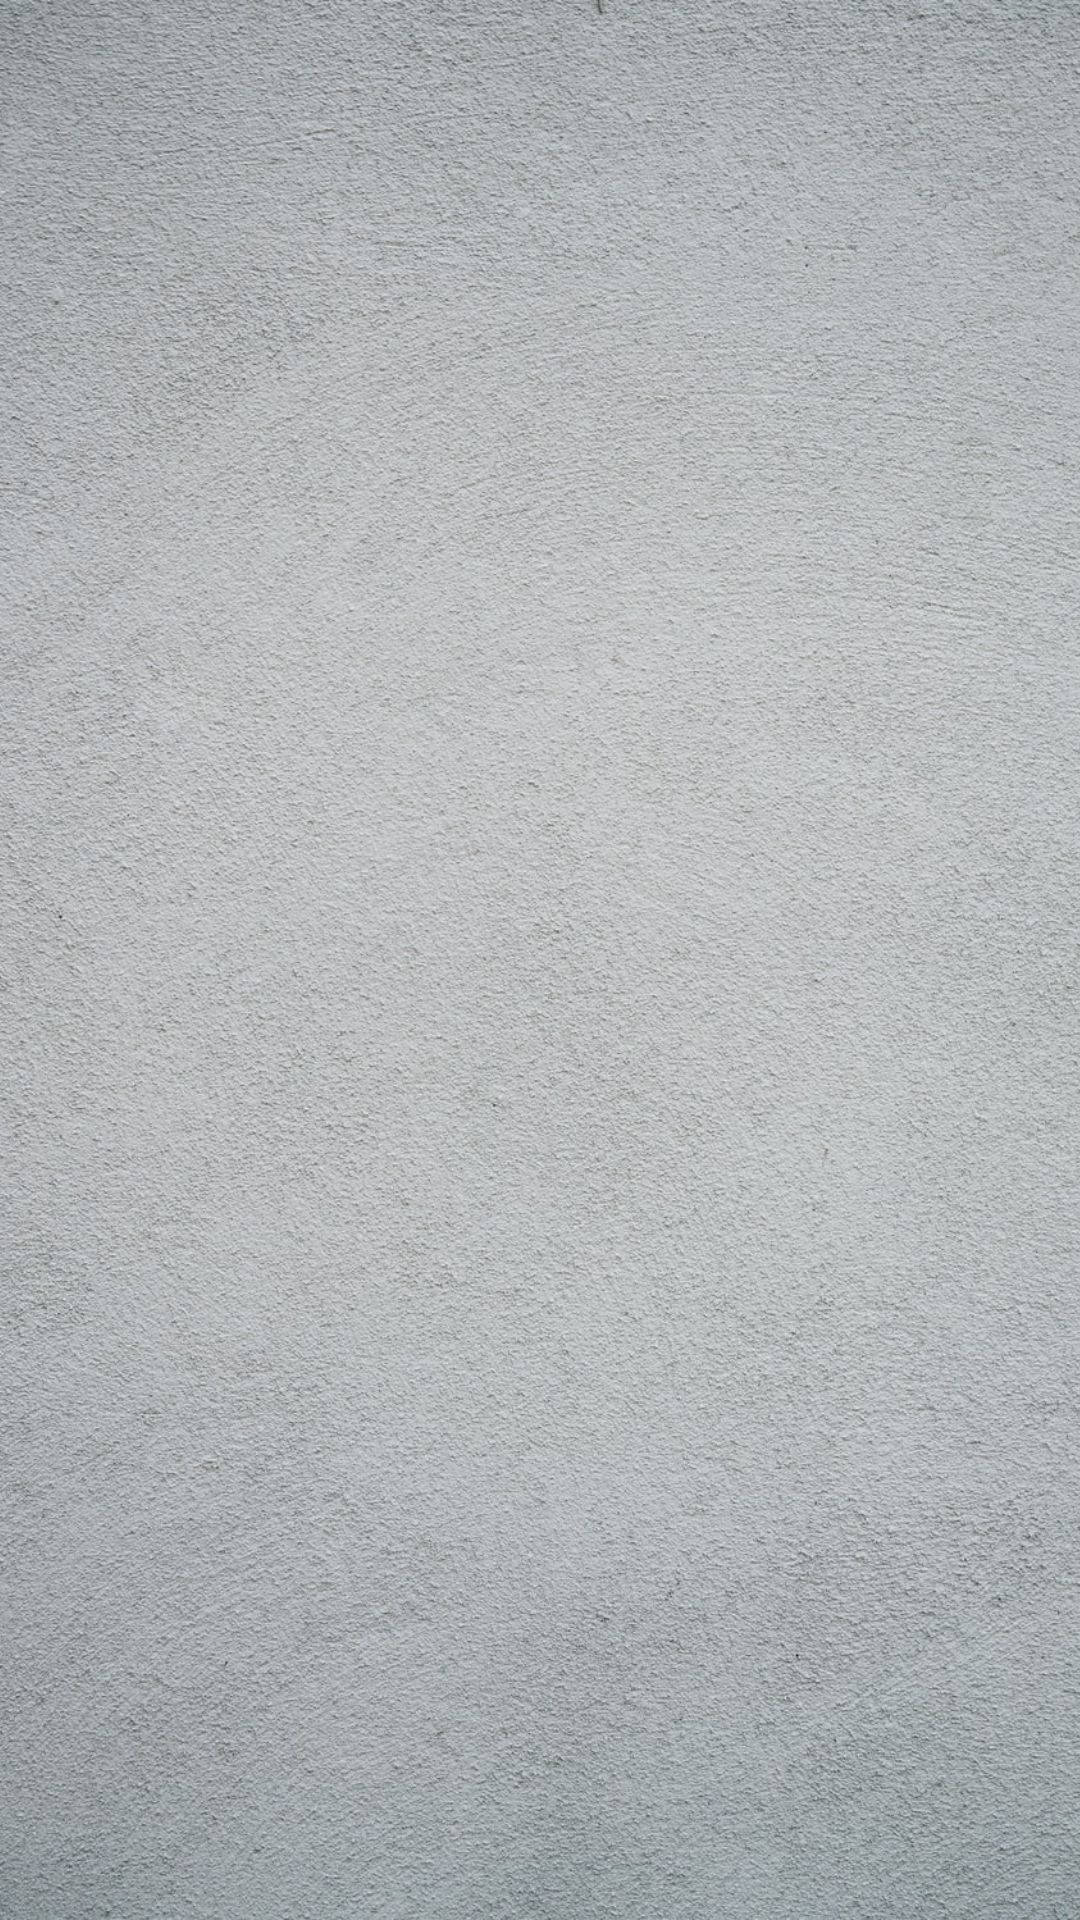 Solid Grey Wall With Subtle Speckles Background